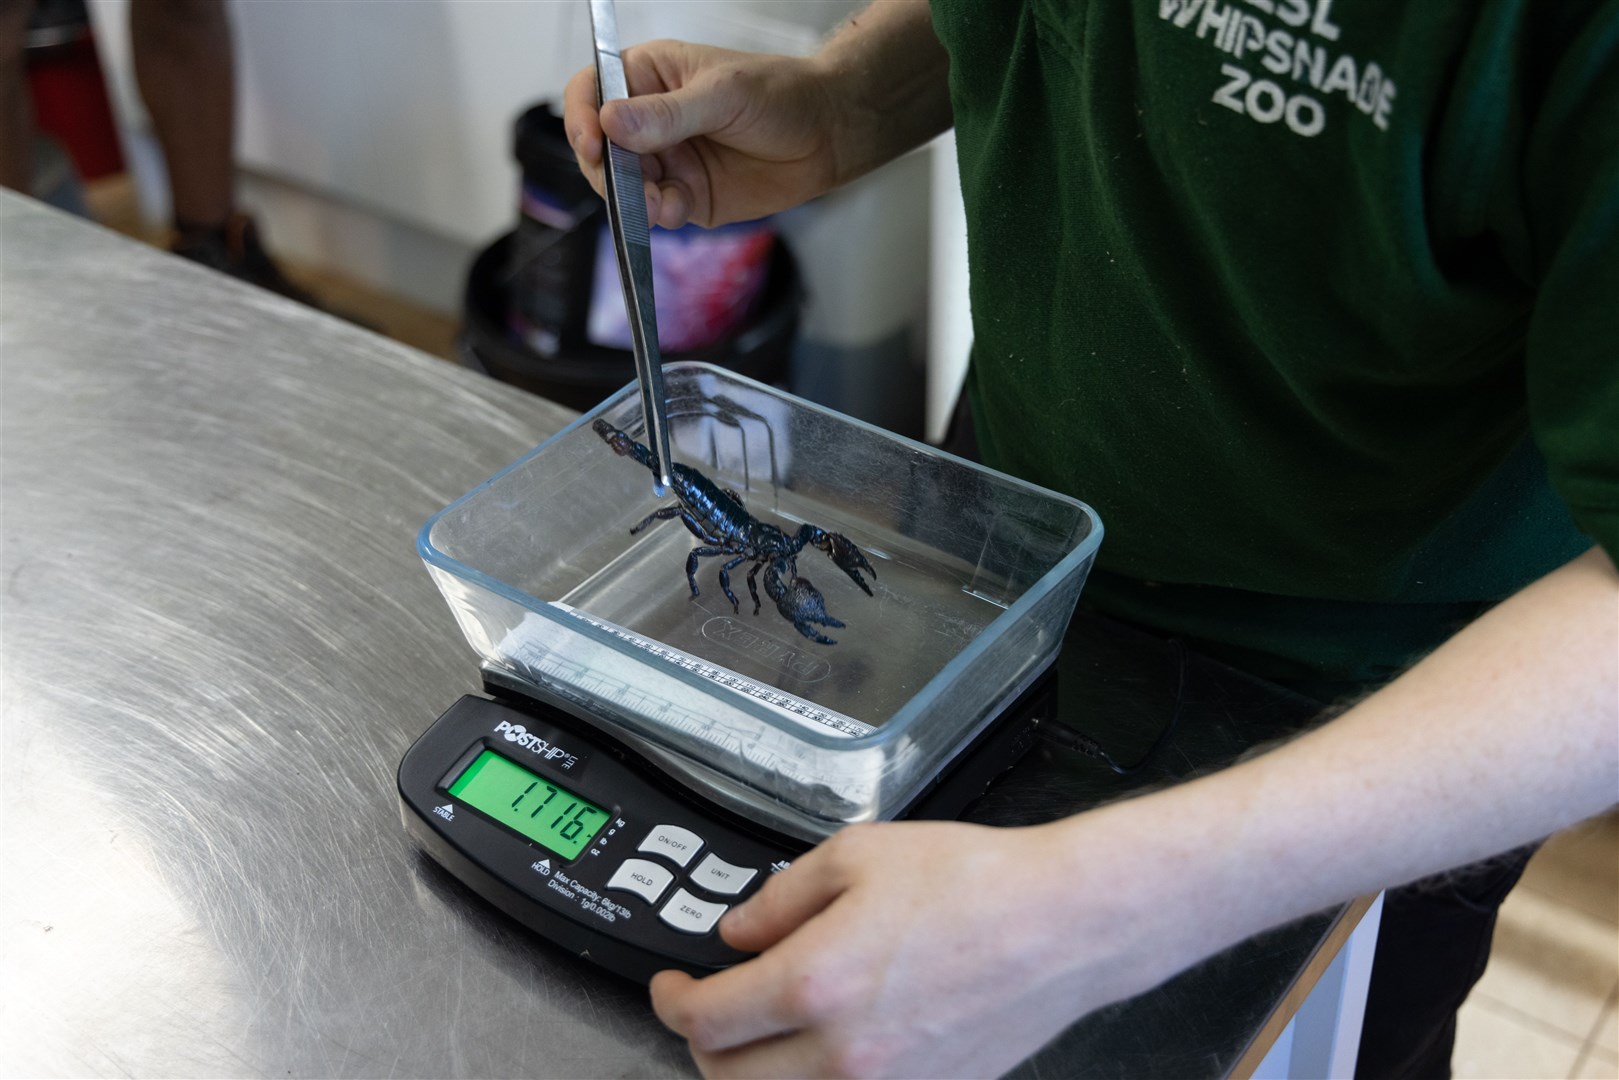 Whipsnade’s smaller creatures required some extra sensitive equipment to weigh them accurately (ZSL/PA)